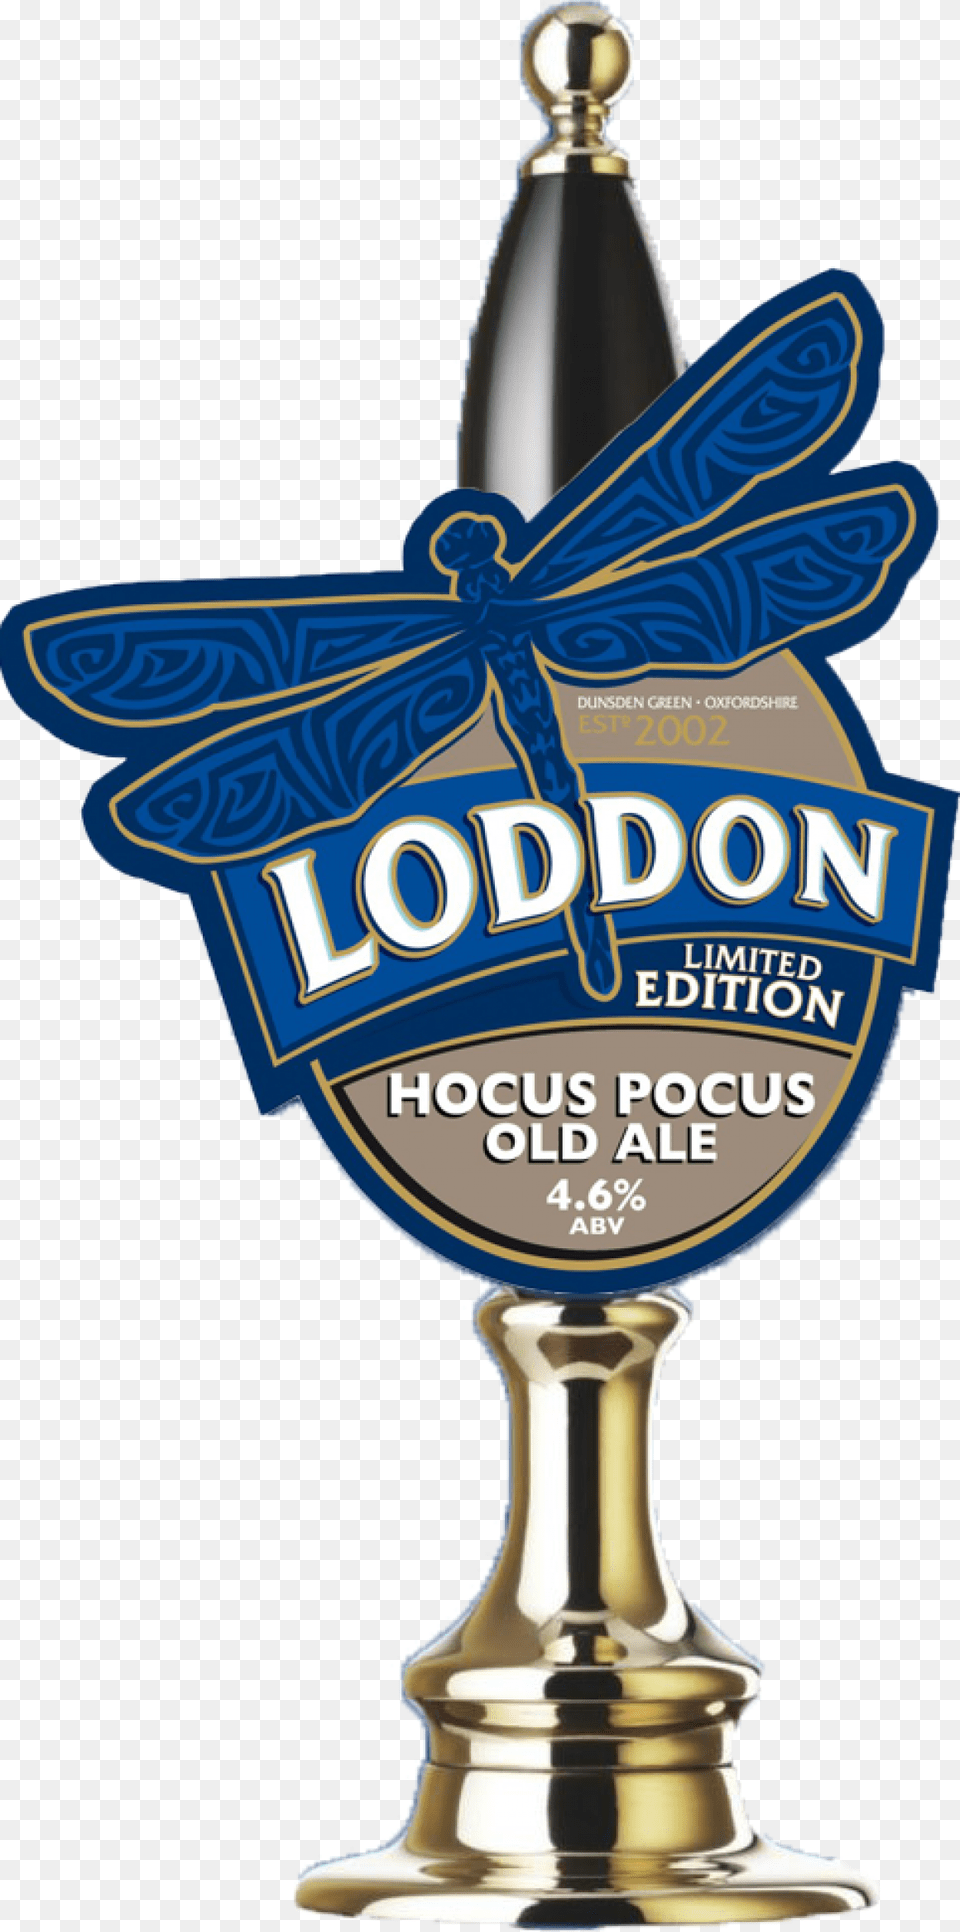 Hocus Pocus Northern Lights Orkney Brewery, Cross, Symbol Free Transparent Png